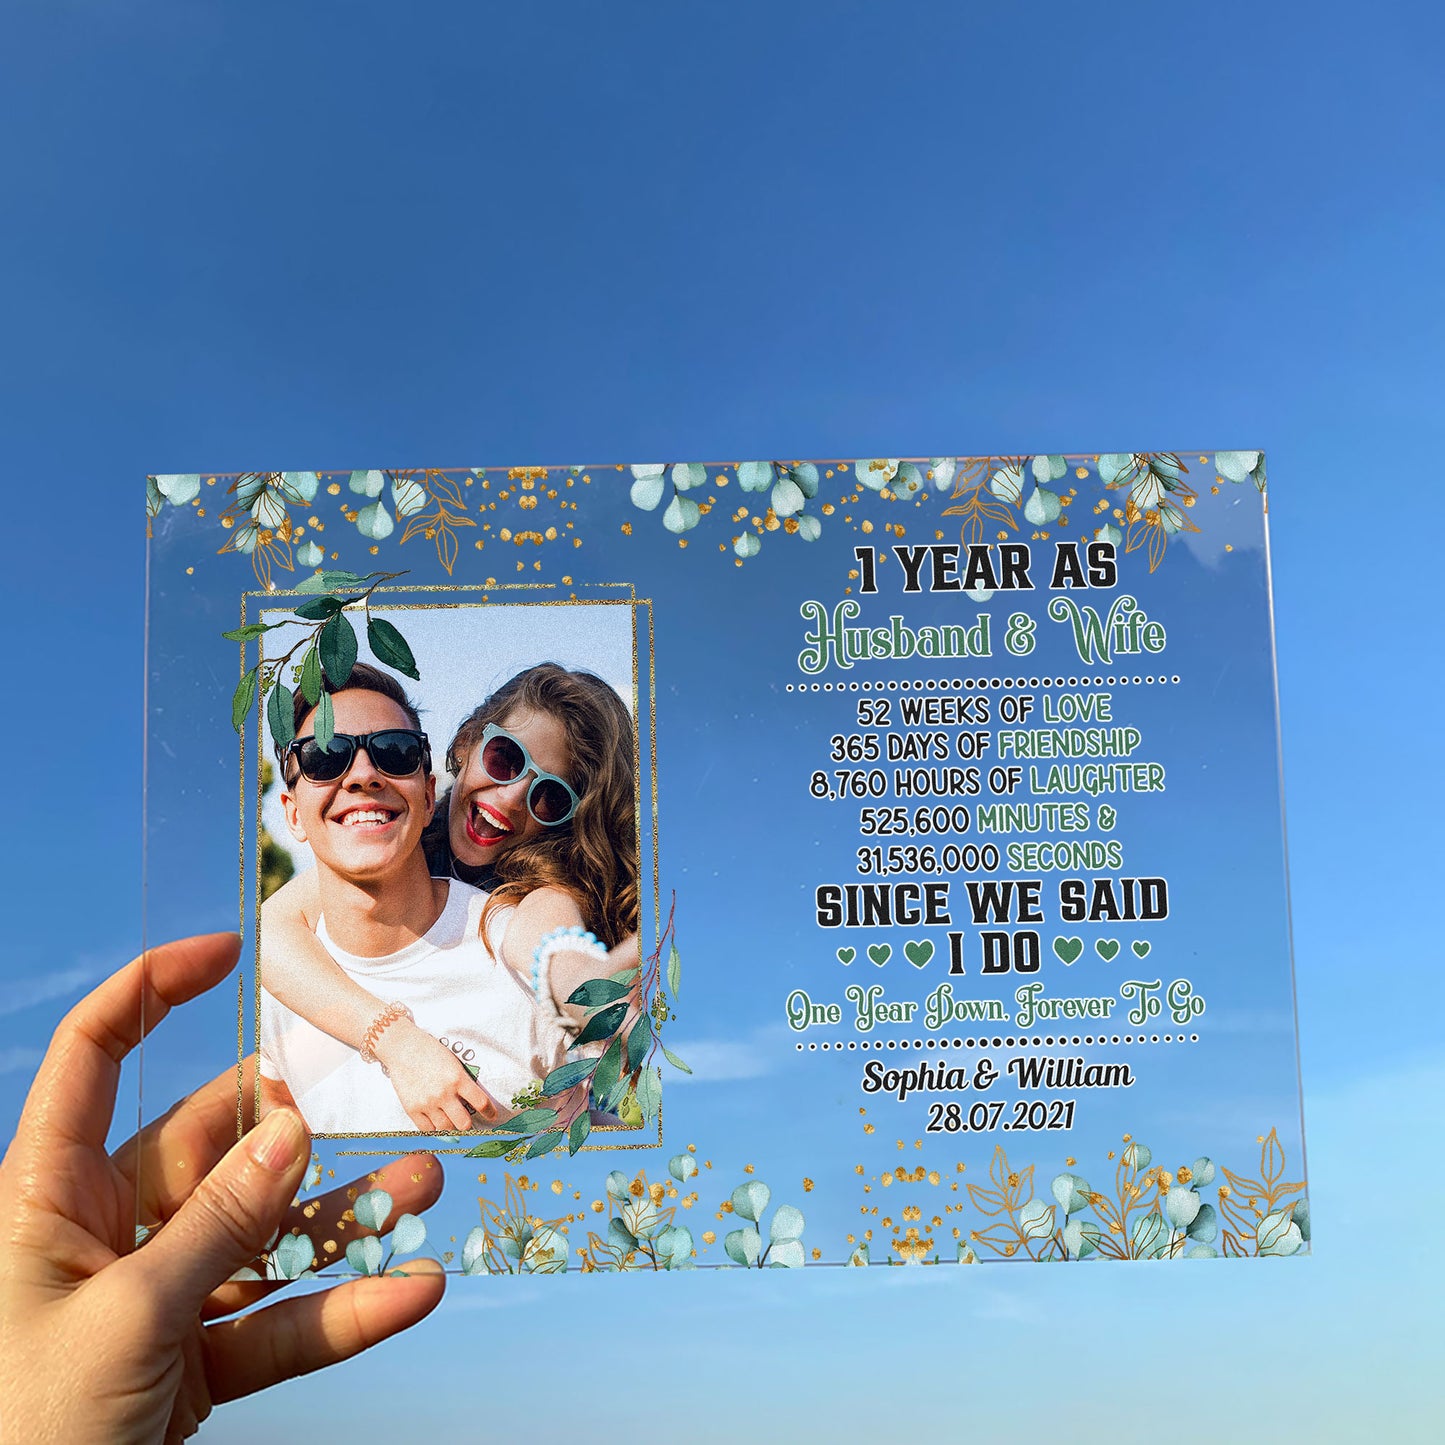 One Year Down Forever To Go - Personalized Acrylic Plaque - 1st Anniversary Gift For Couple, Husband, Wife